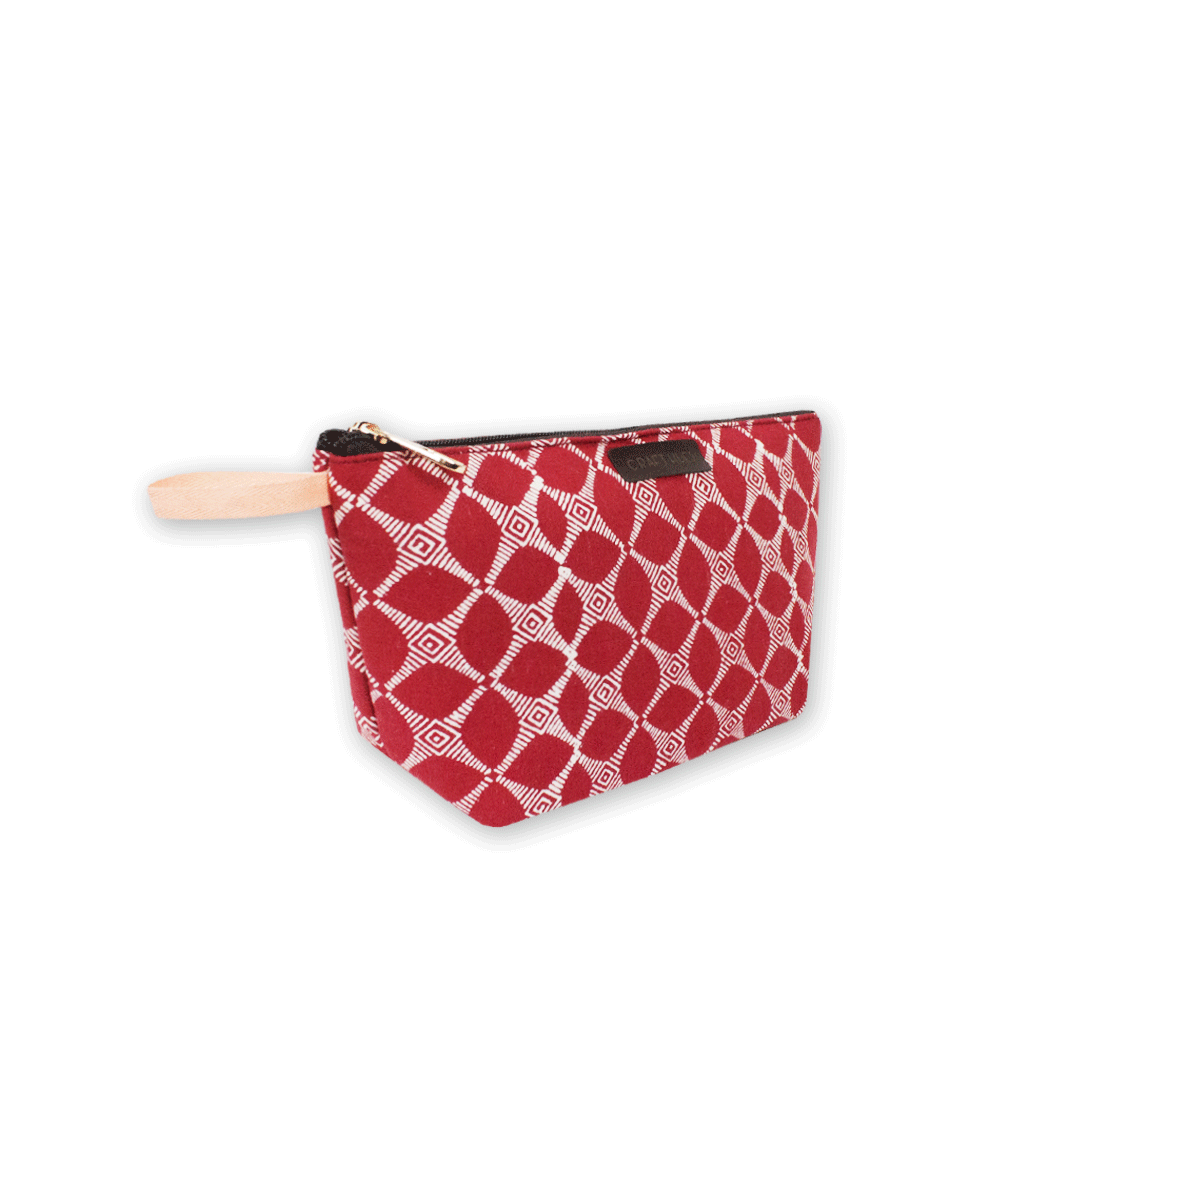 Red Petals Block Printed Pouch